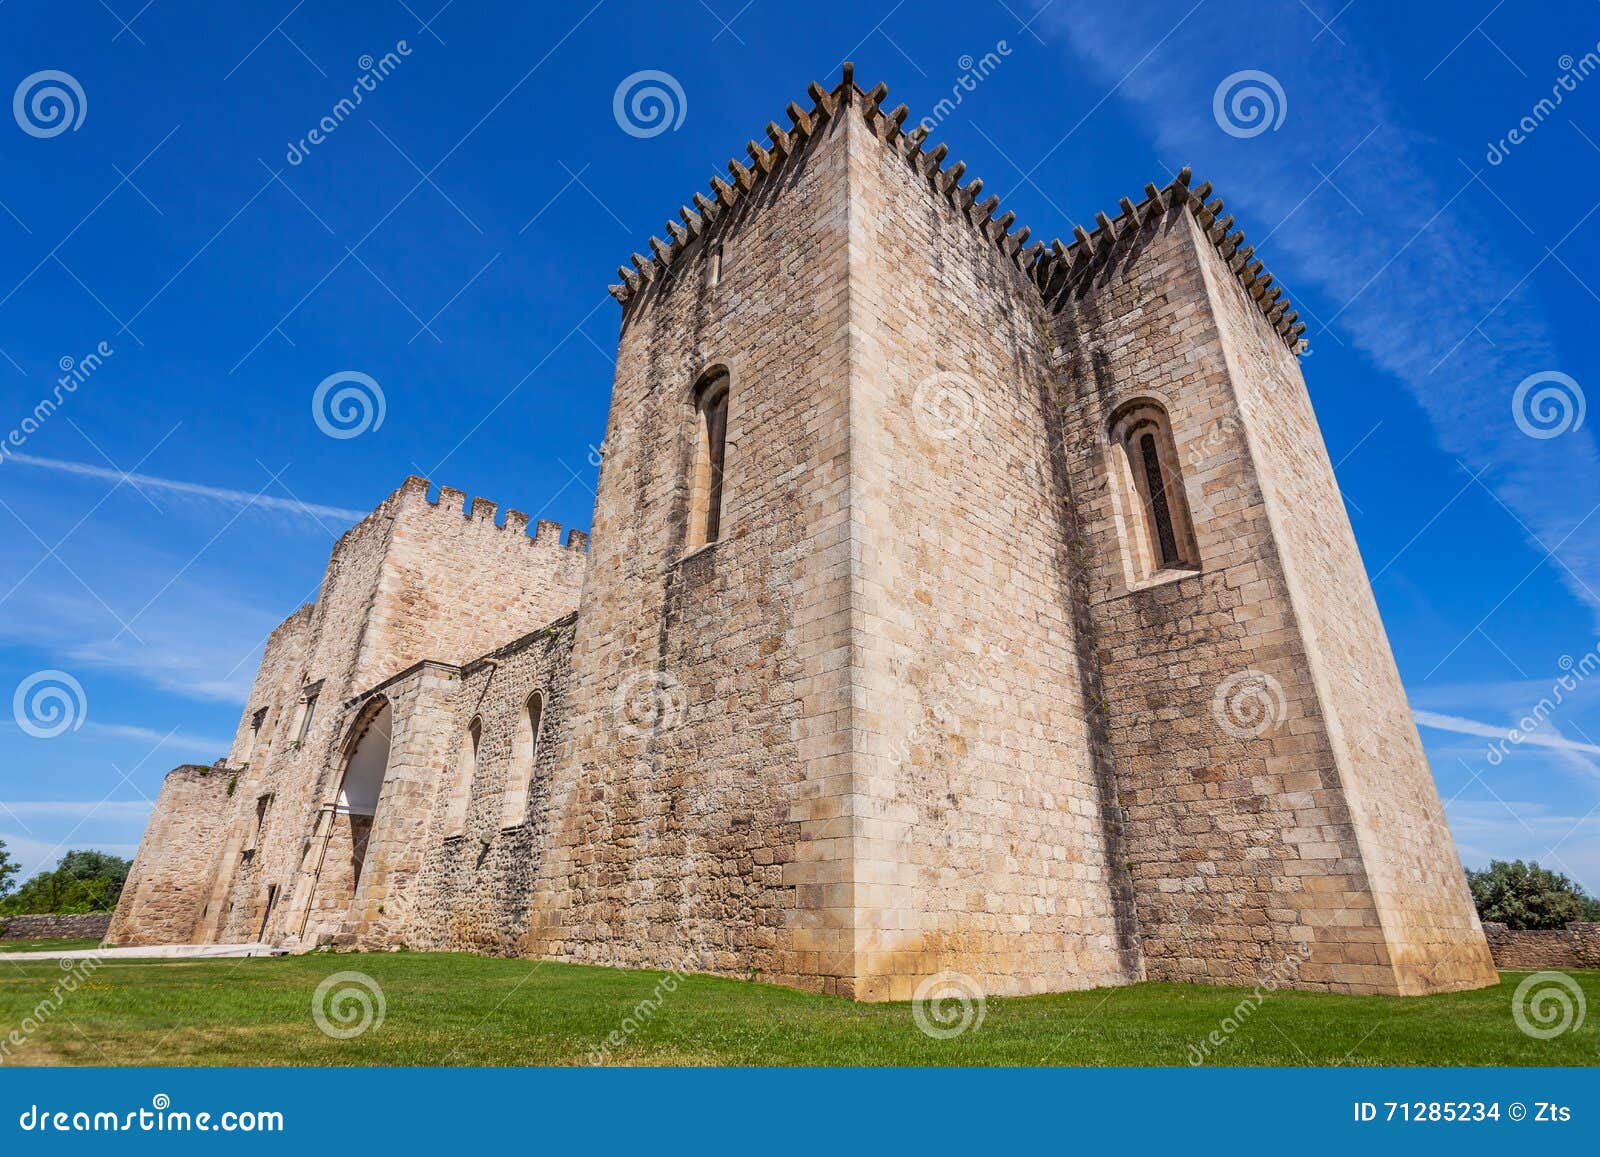 flor da rosa monastery in crato. belonged to the hospitaller knights